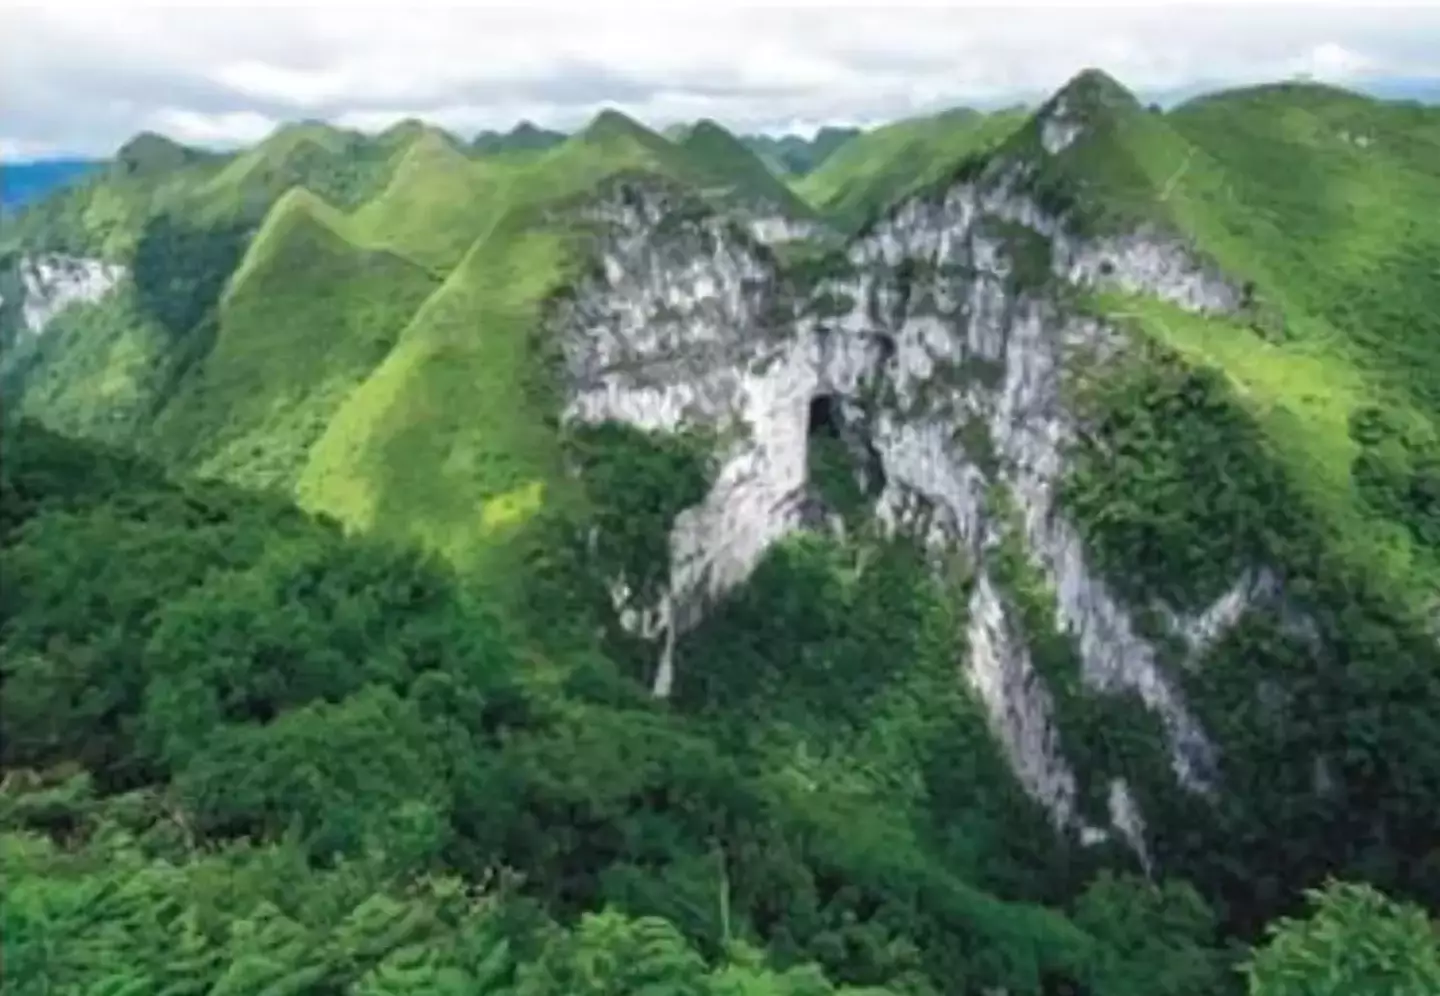 Southern China is home to many sinkholes, forests and caves.